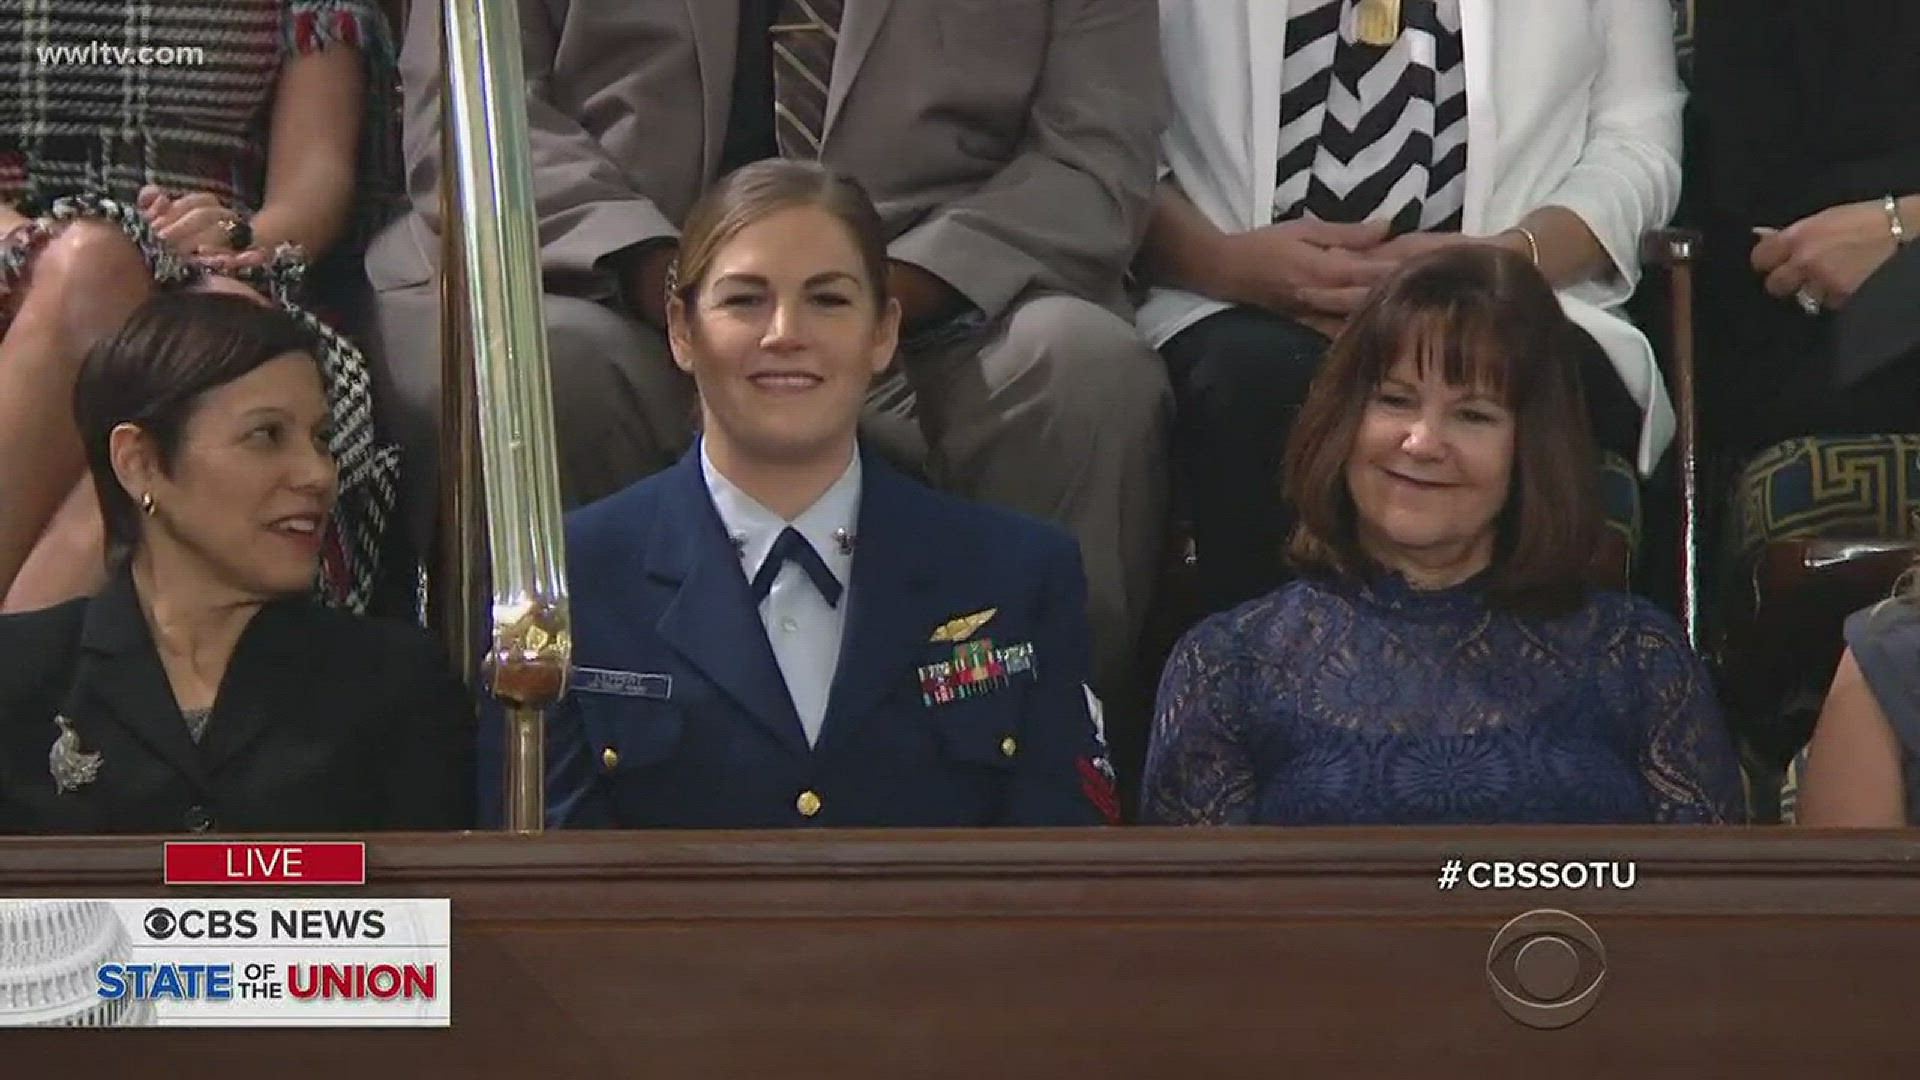 Ashlee Leppert was recognized during President Trump's State of the Union address for her work during last year's hurricane season.